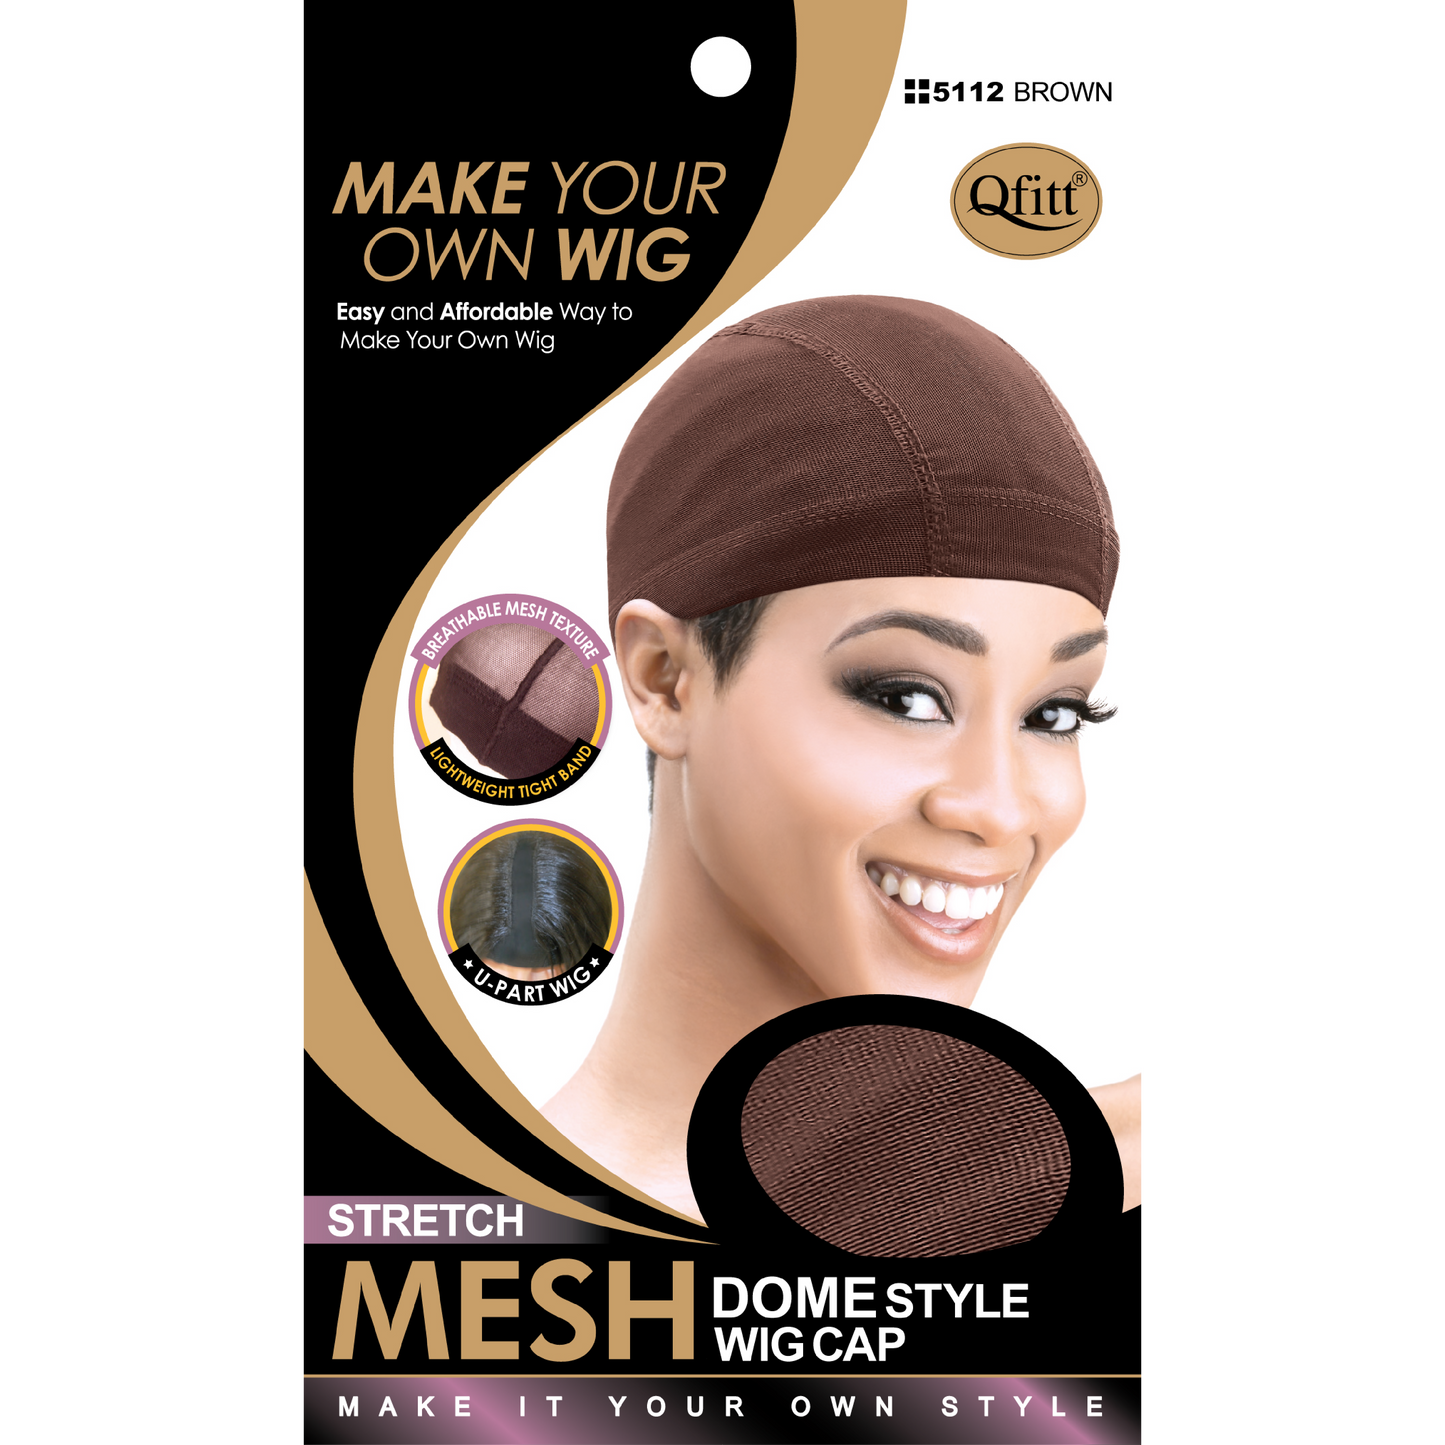 STRETCH MESH DOME STYLE WIG CAP